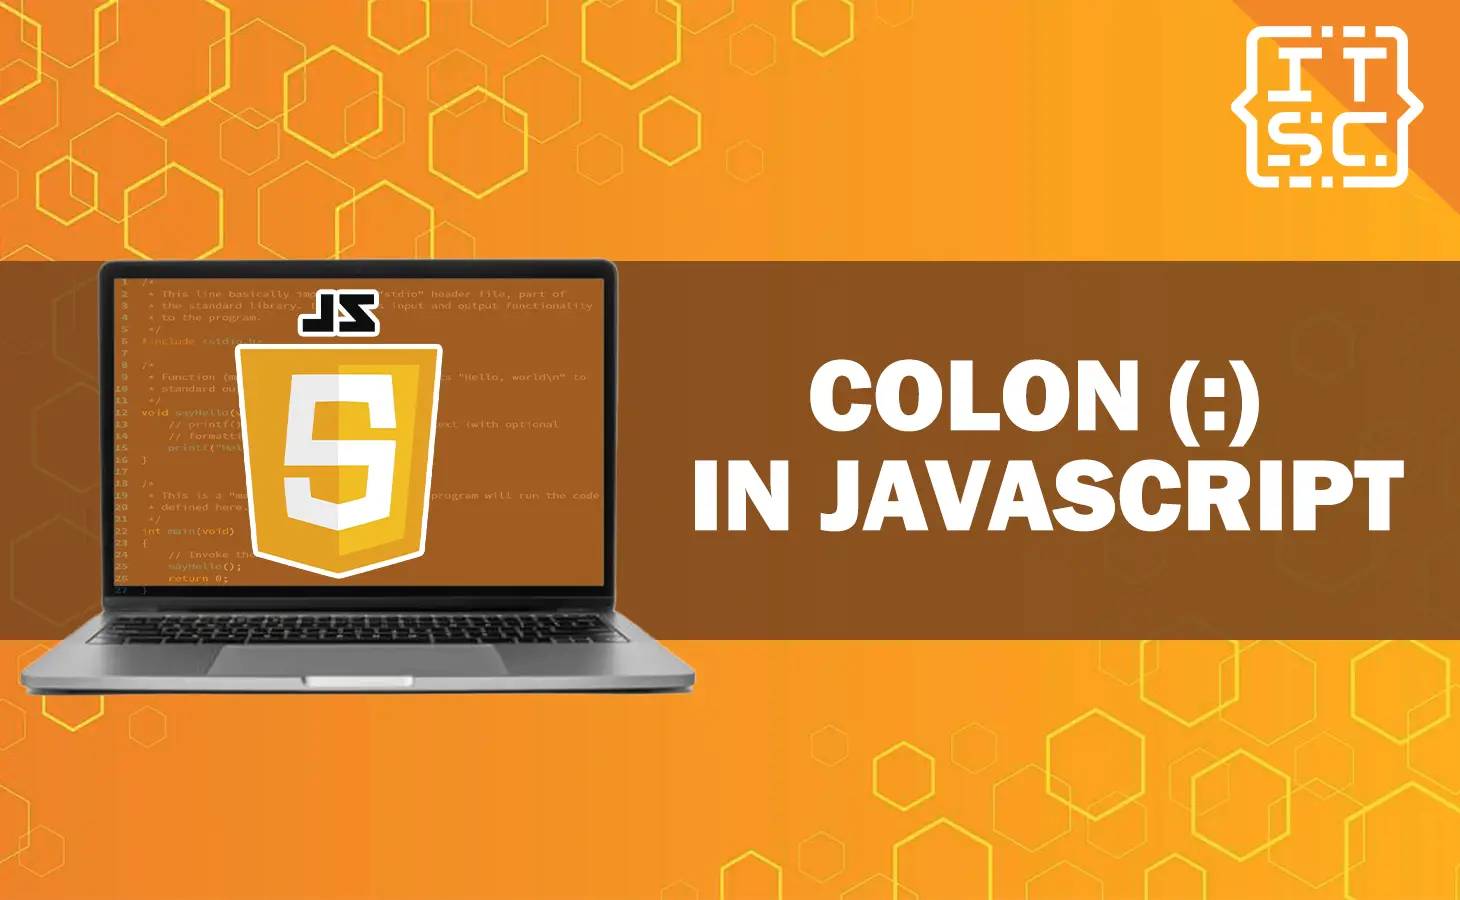 What is the used of colon (:) in JavaScript?